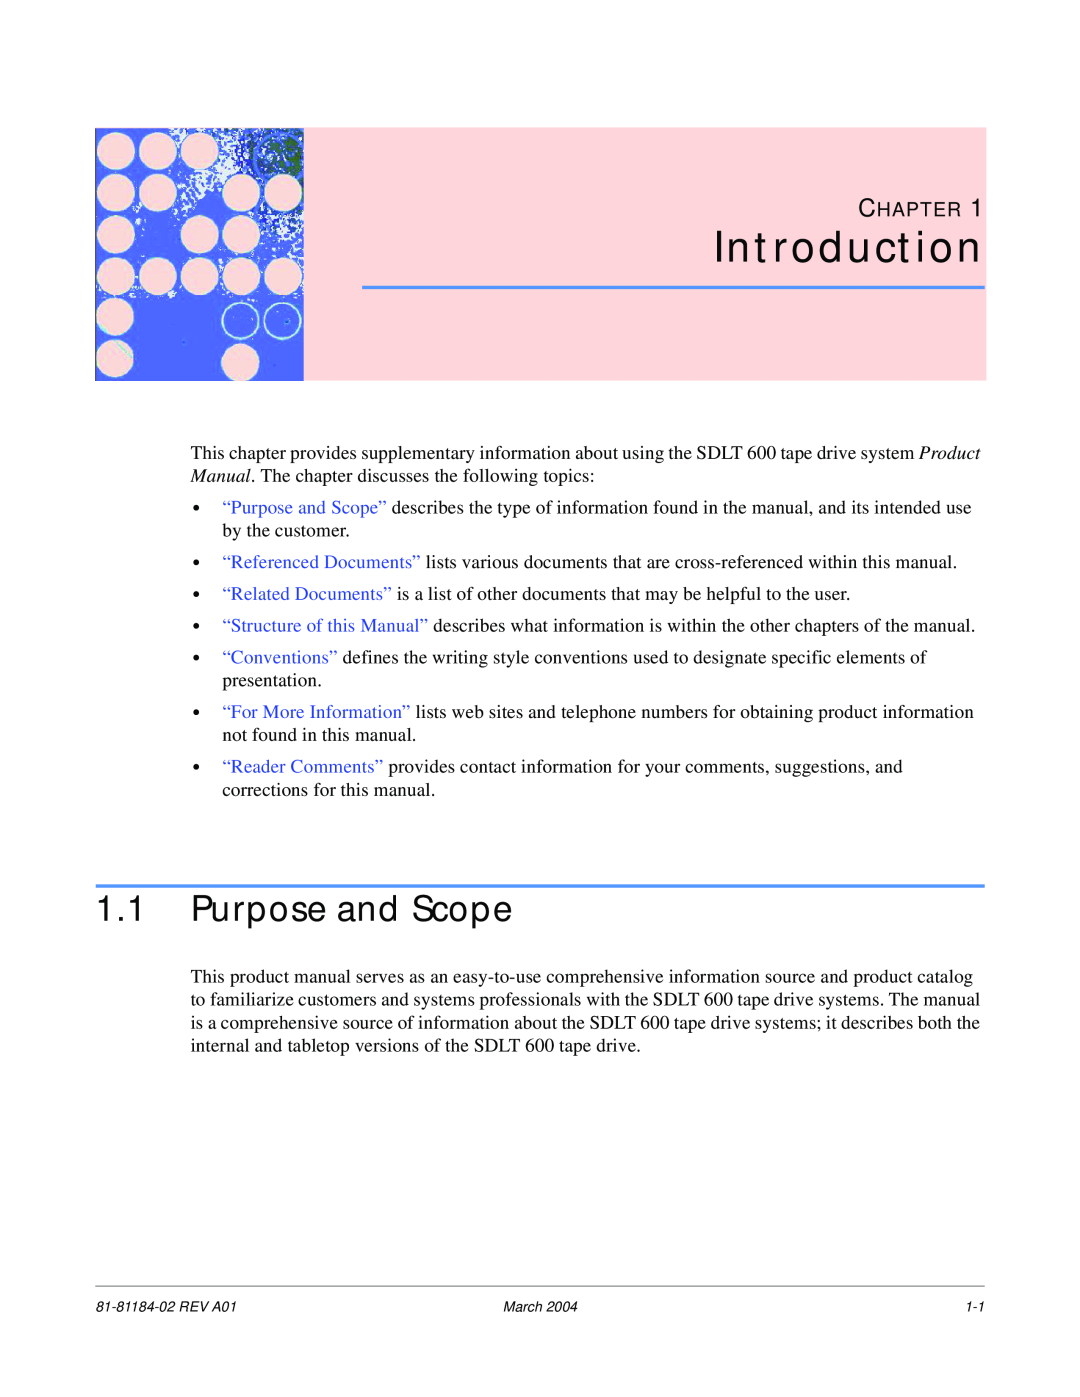 Tandberg Data 600 manual Introduction, Purpose and Scope, Chapter 